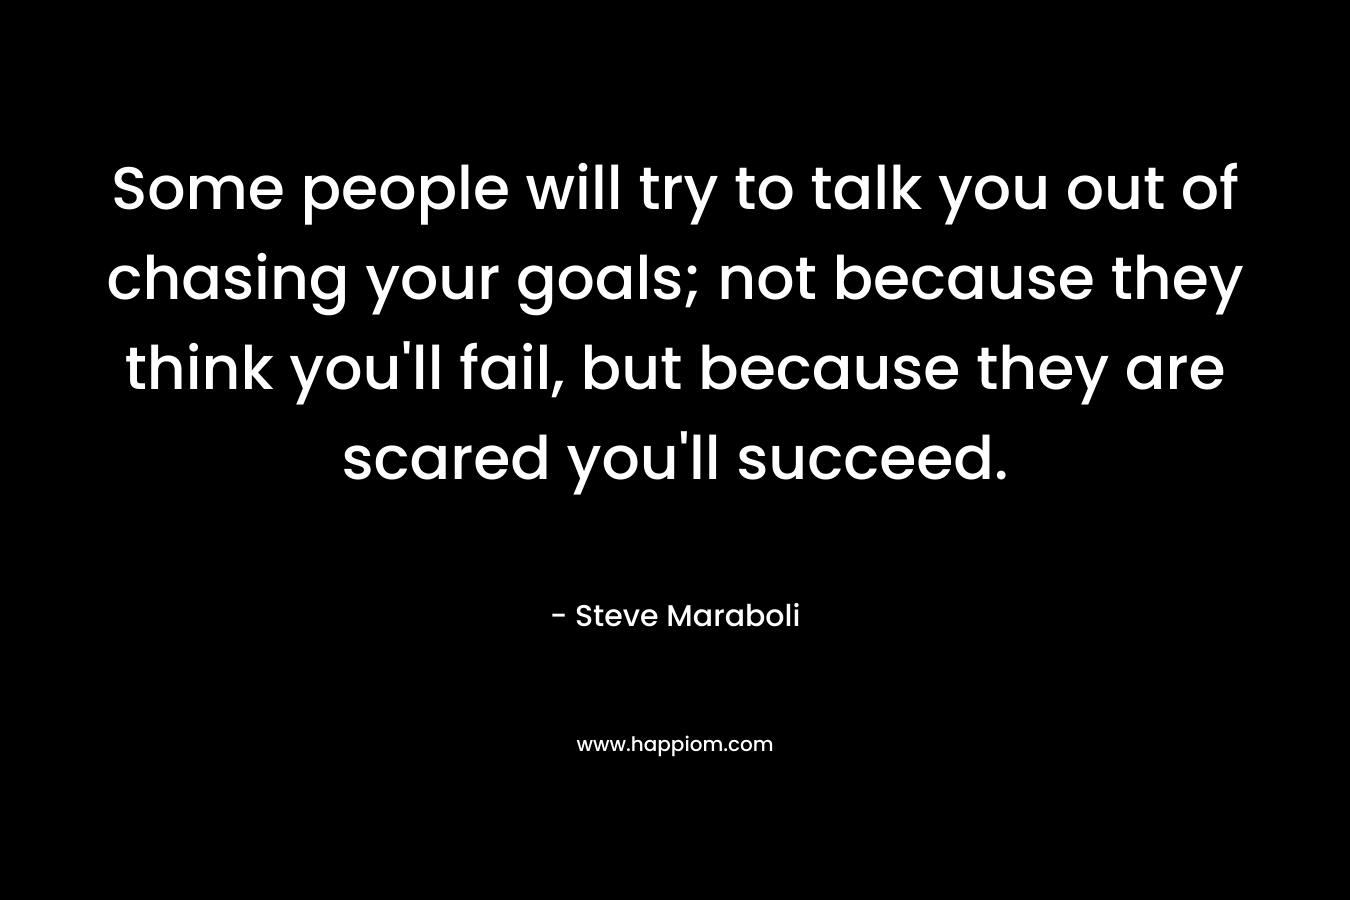 Some people will try to talk you out of chasing your goals; not because they think you'll fail, but because they are scared you'll succeed.